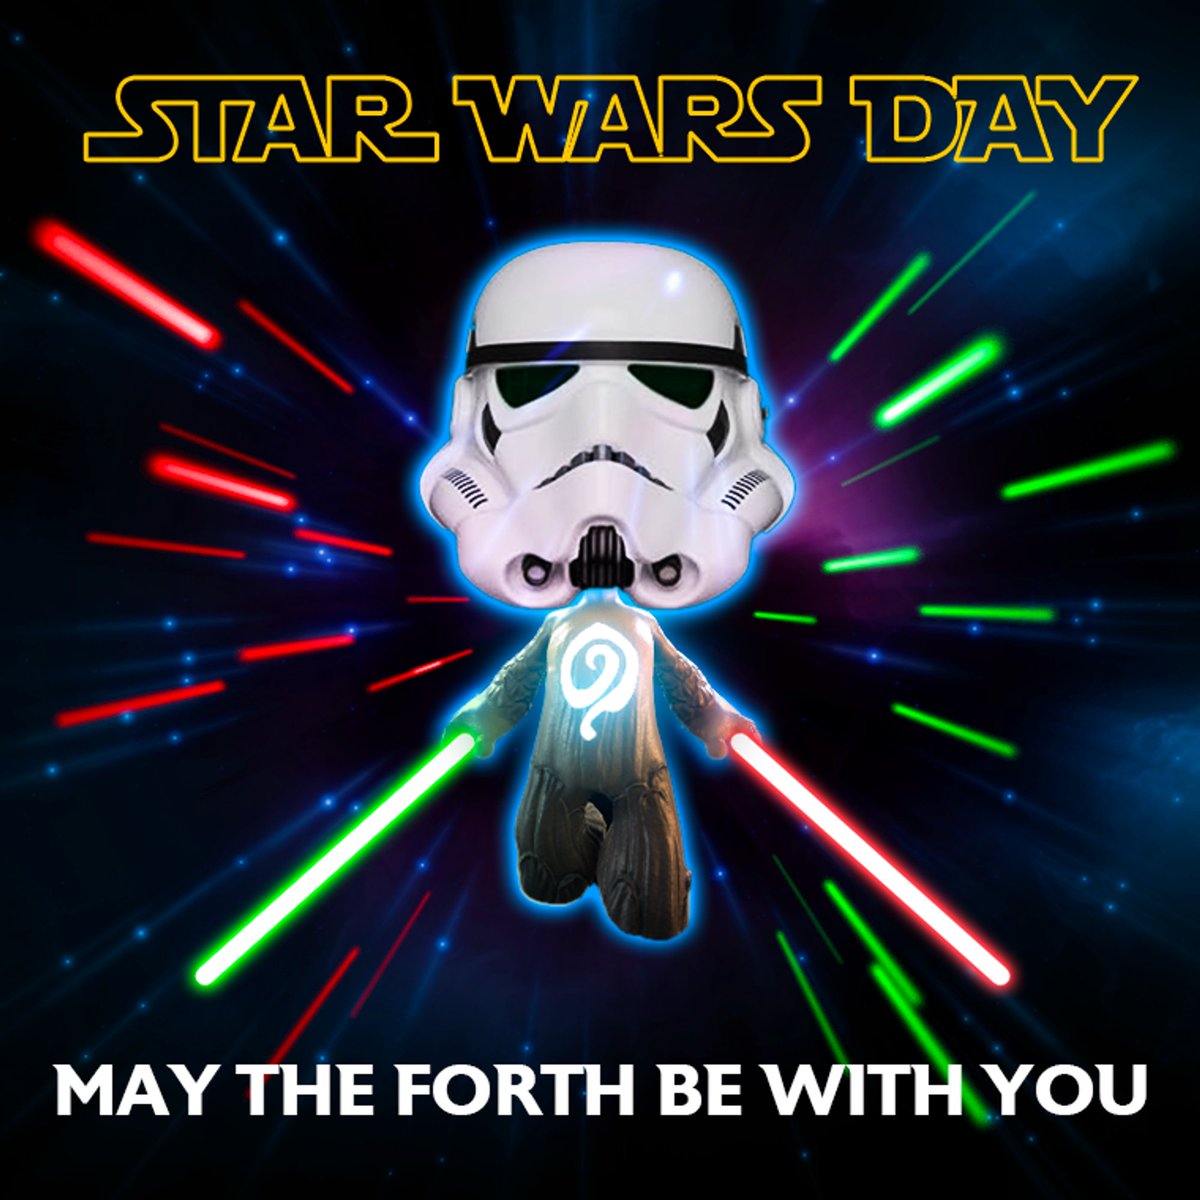 Happy Star Wars Day 🪐 May the Fourth be with you all!